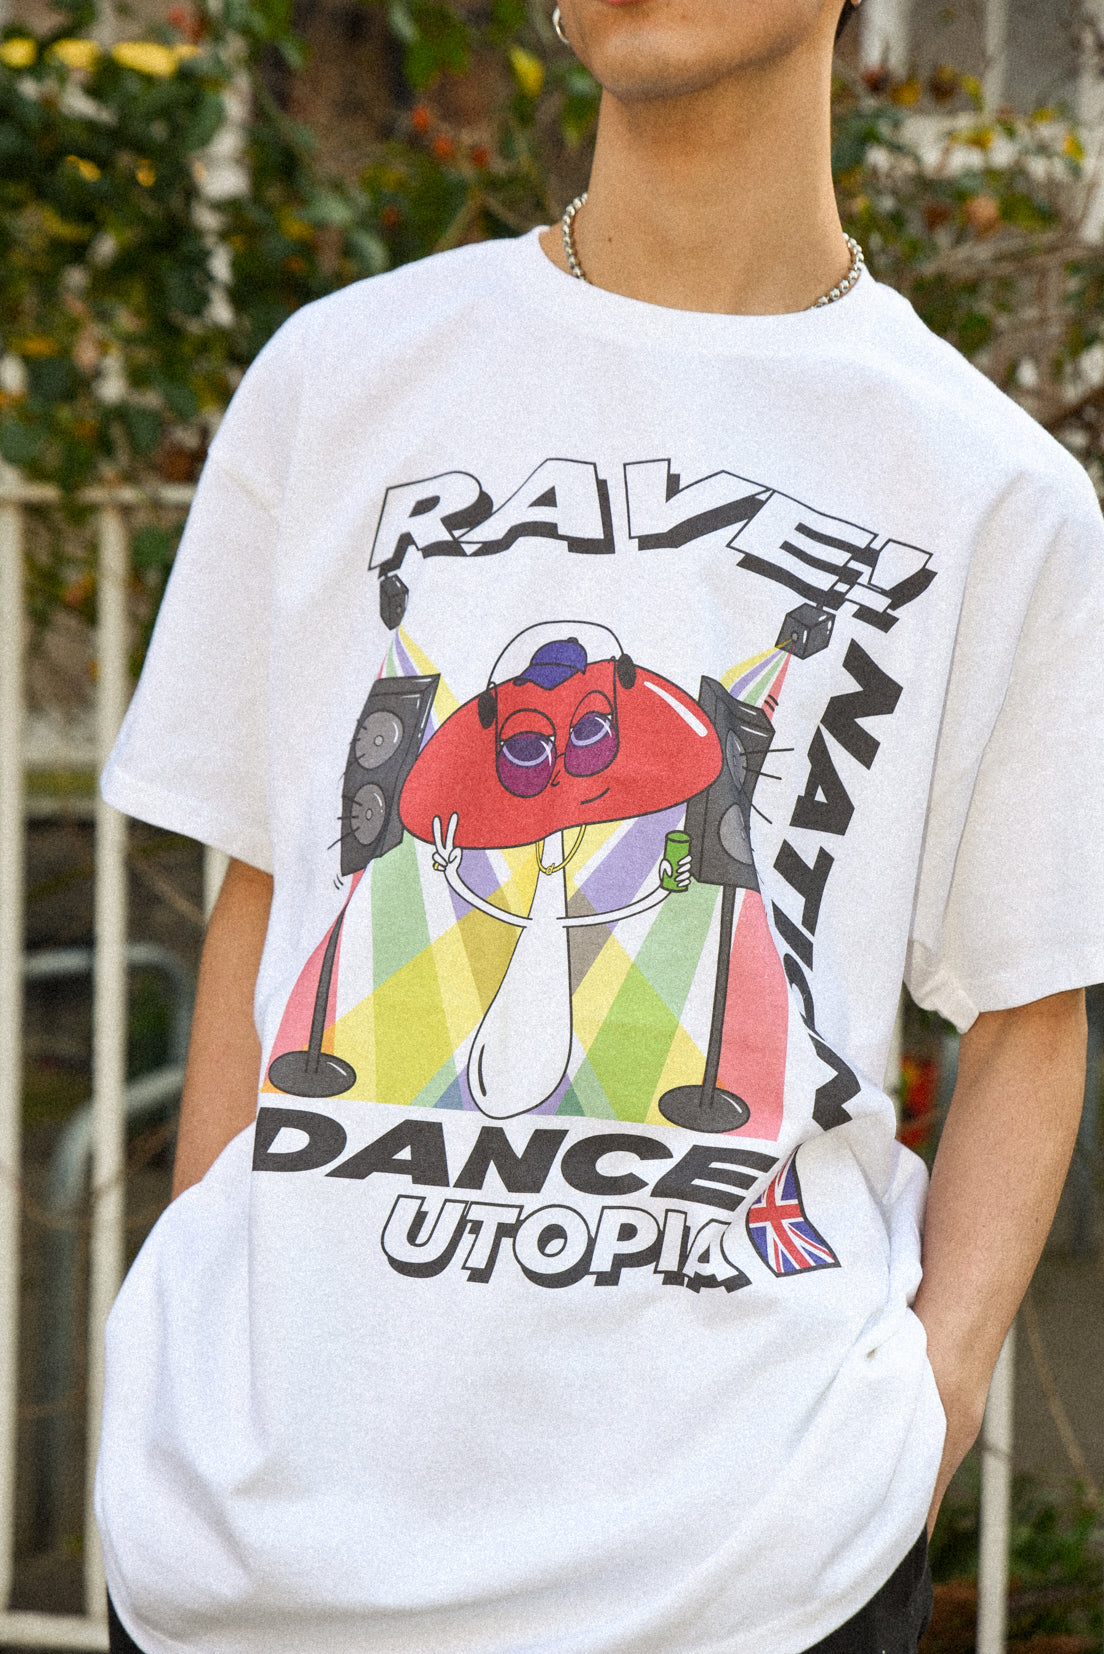 Short Sleeved T-shirt in White with Mushroom Rave Nation Print